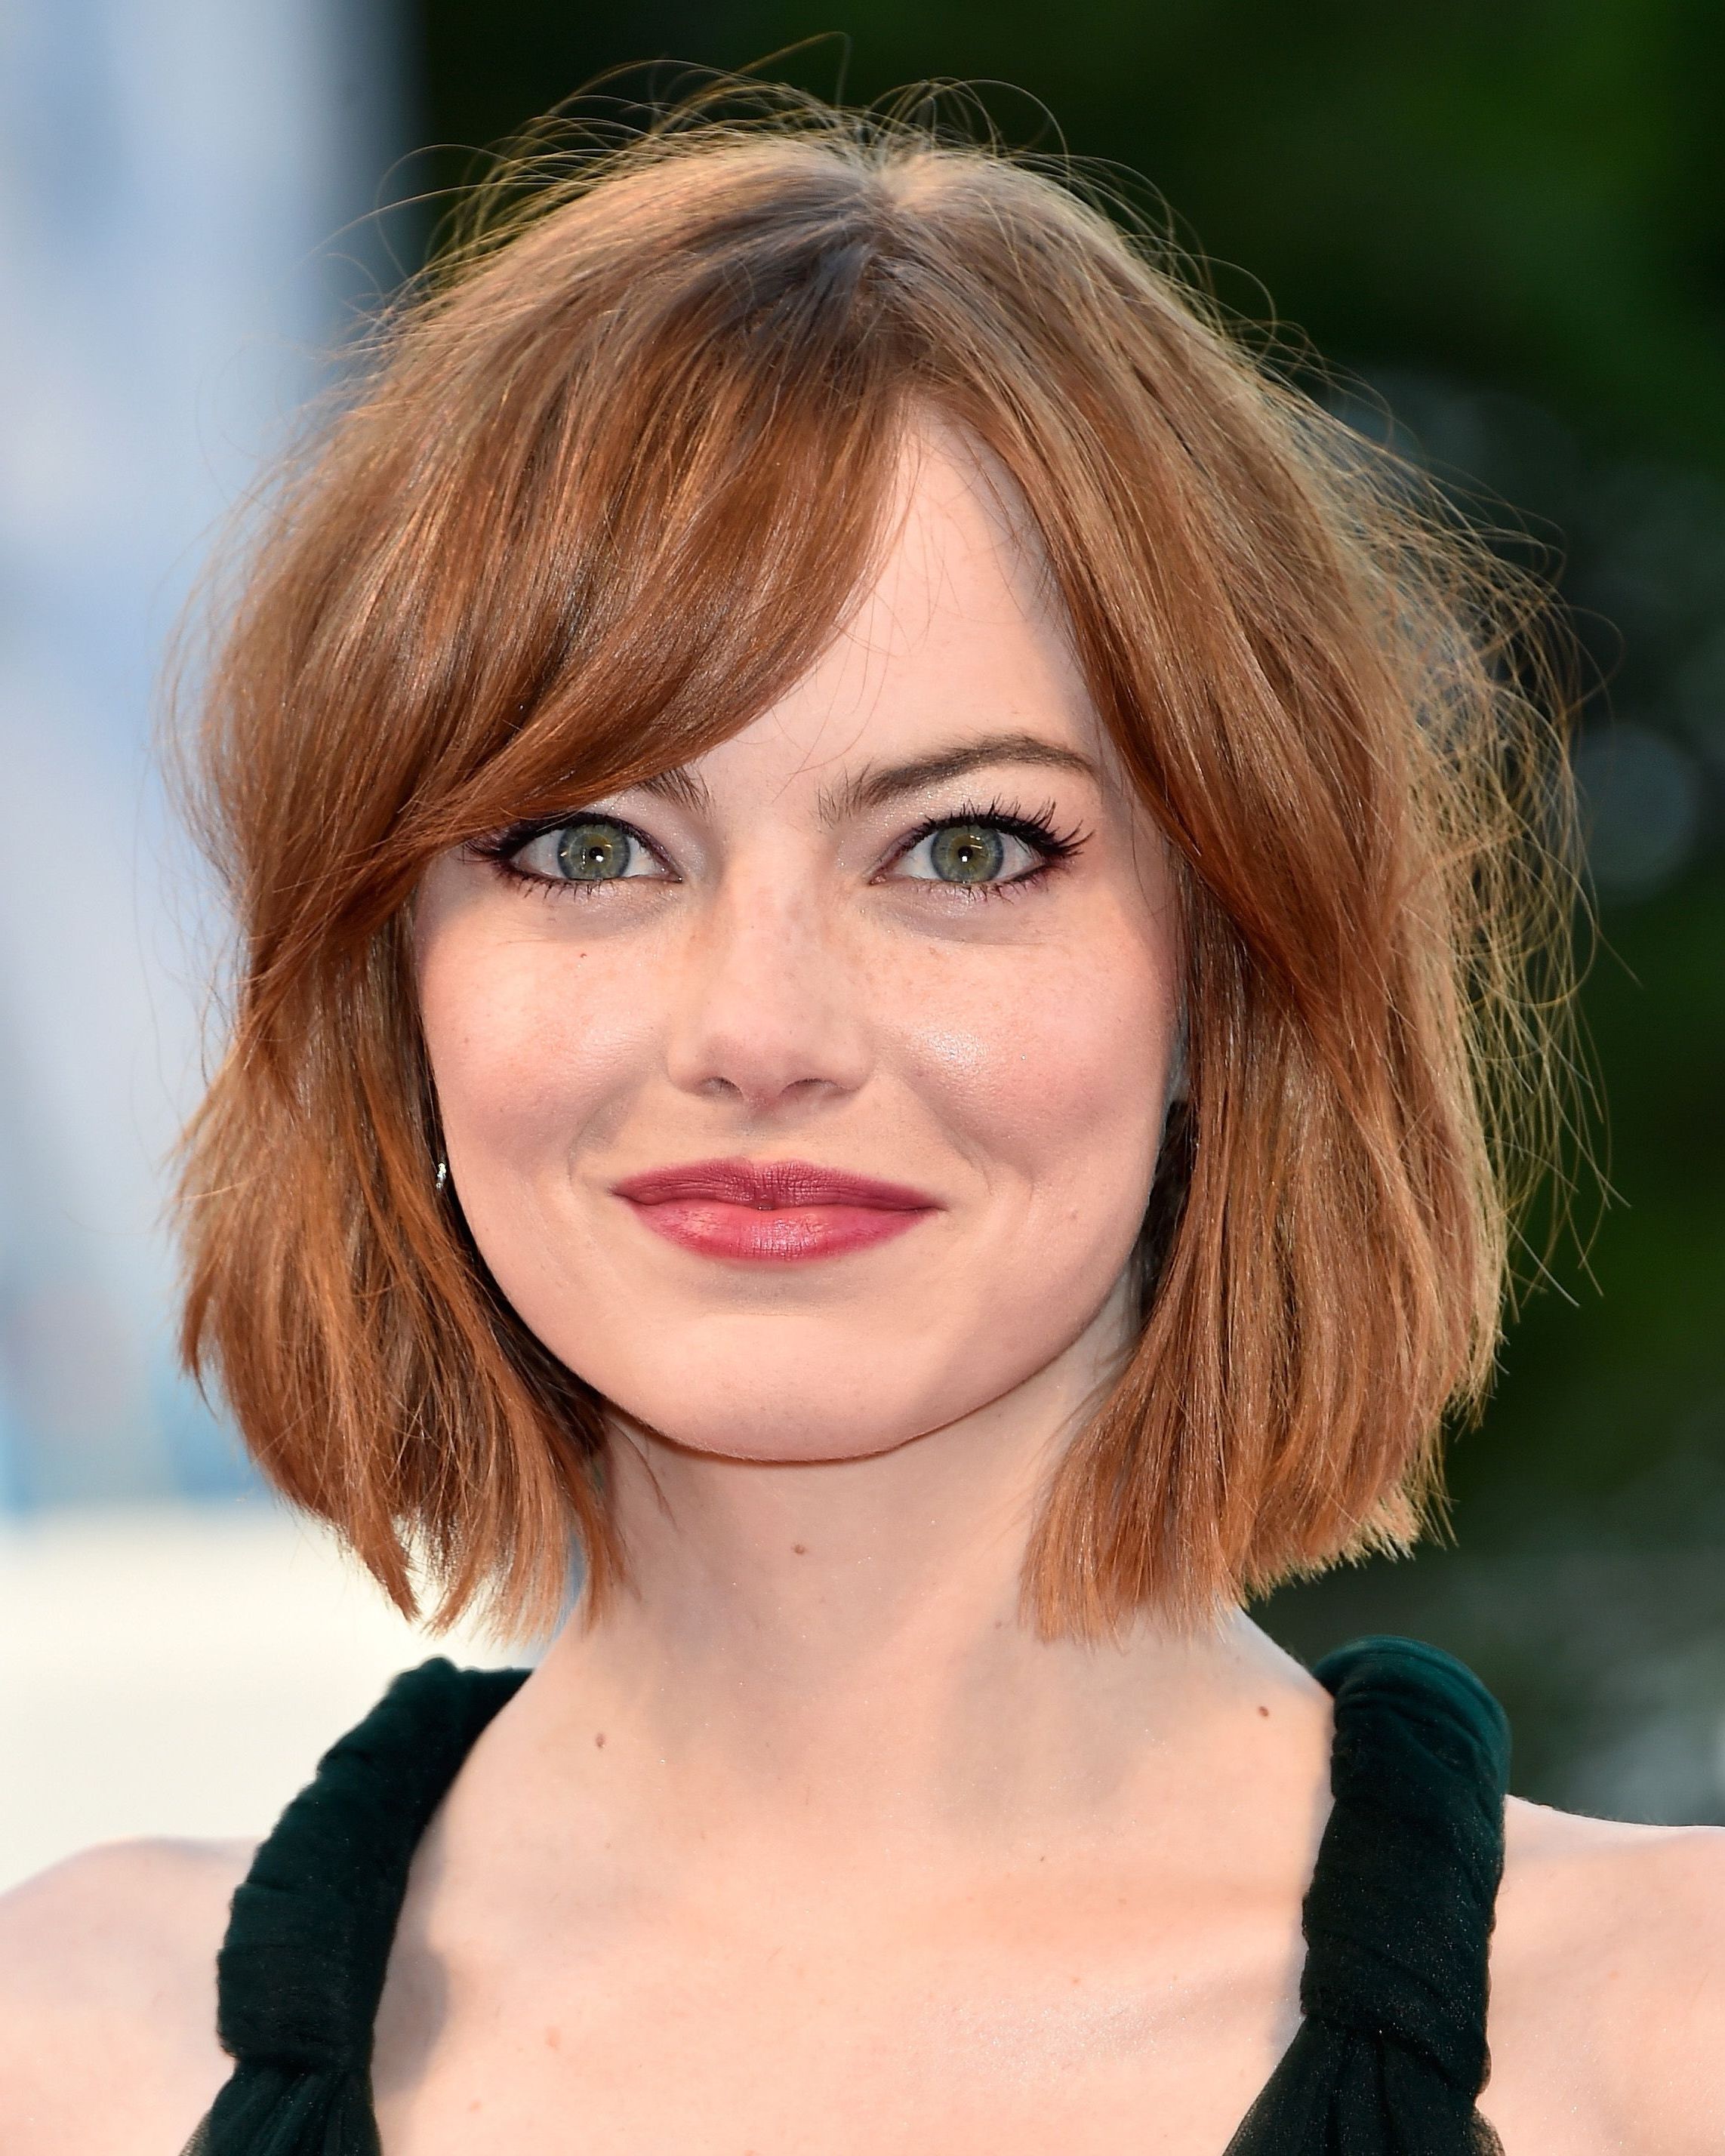 32 Best Short Hair Styles – Bobs, Pixie Cuts, And More Celebrity Throughout Cropped Short Hairstyles (View 14 of 25)